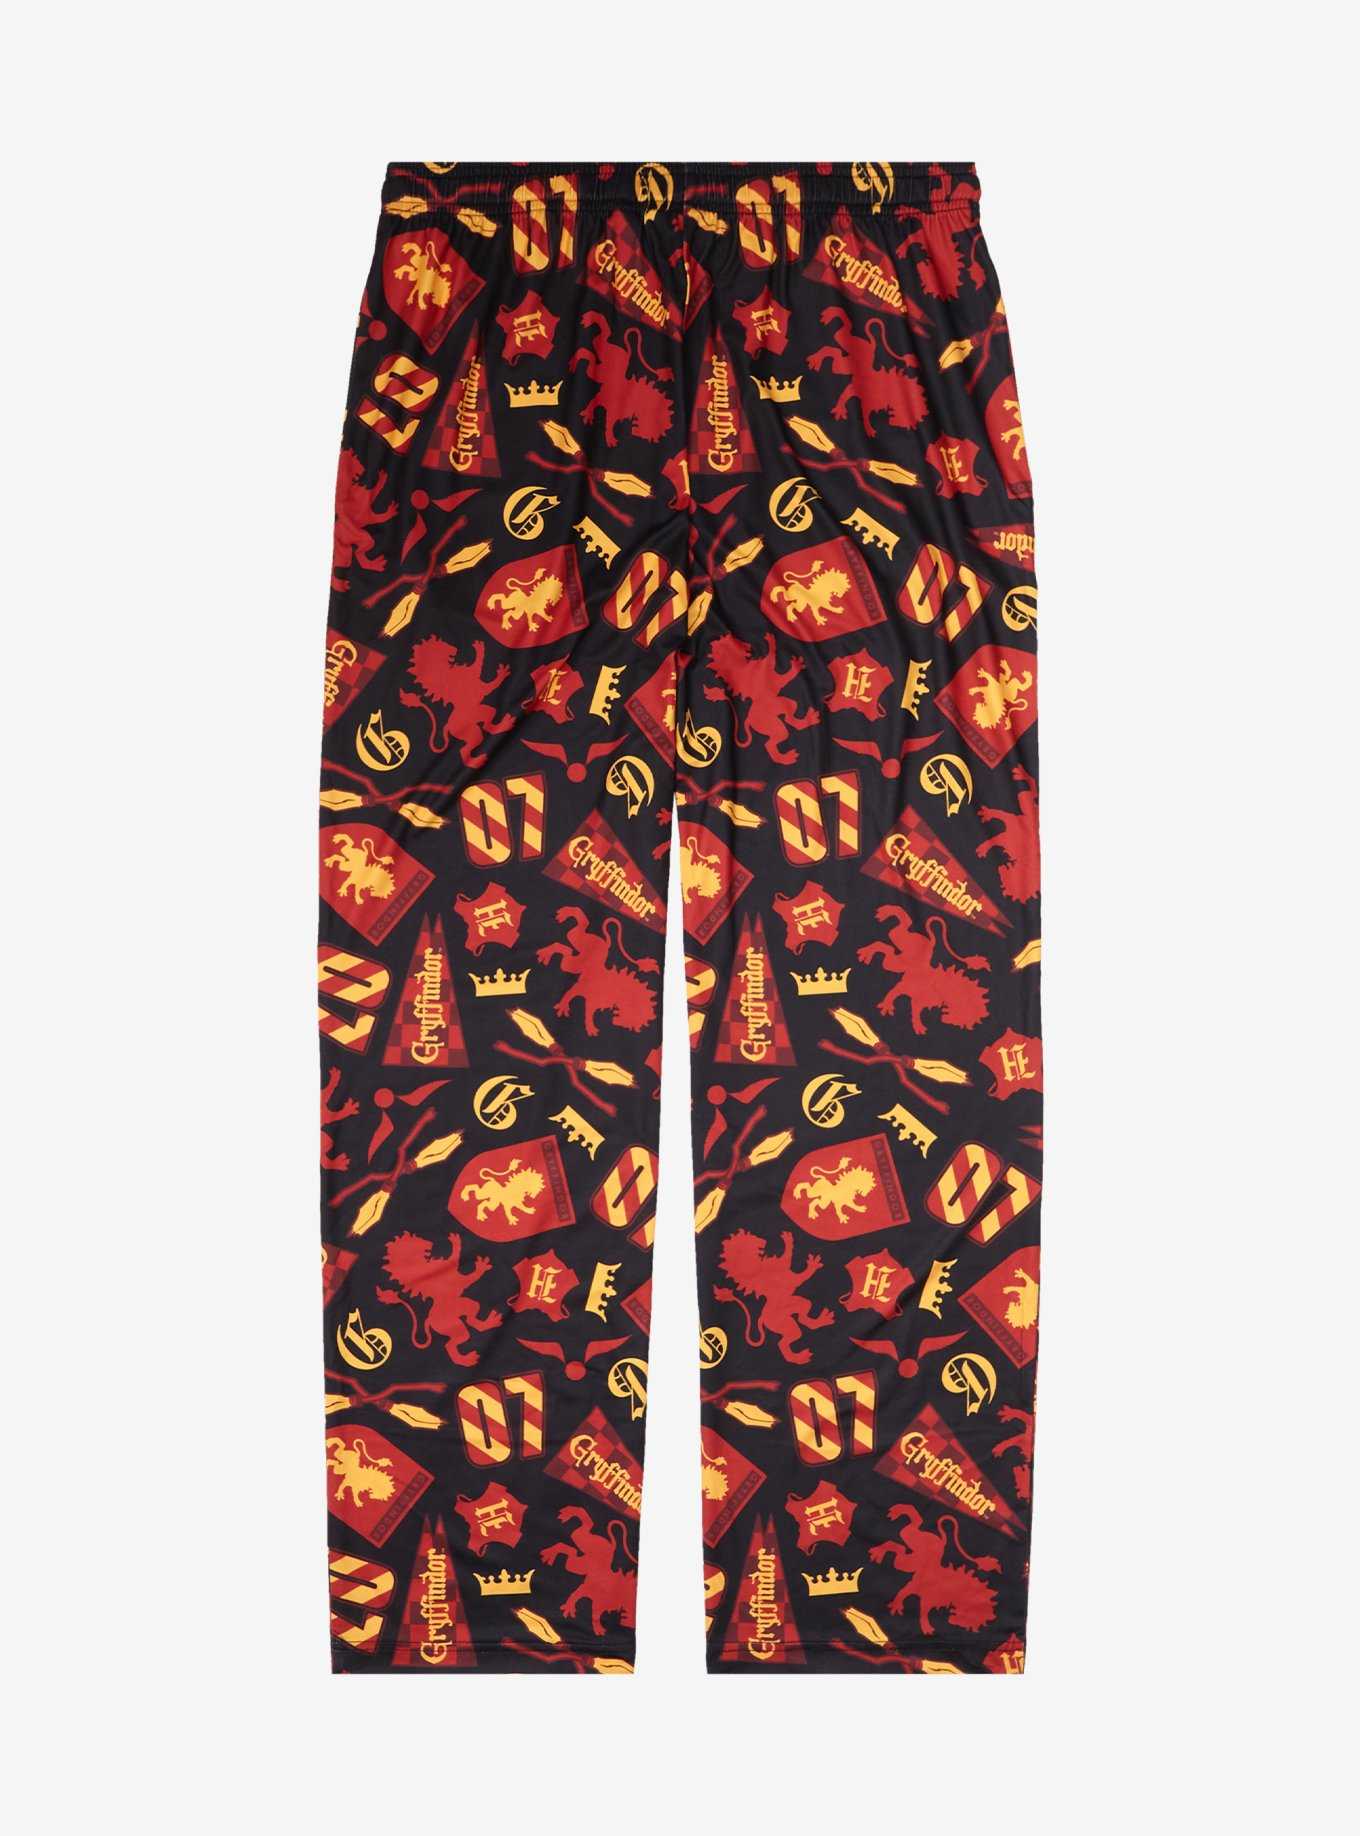 Harry Potter Gryffindor Quidditch Allover Print Sleep Pants - BoxLunch Exclusive, , hi-res